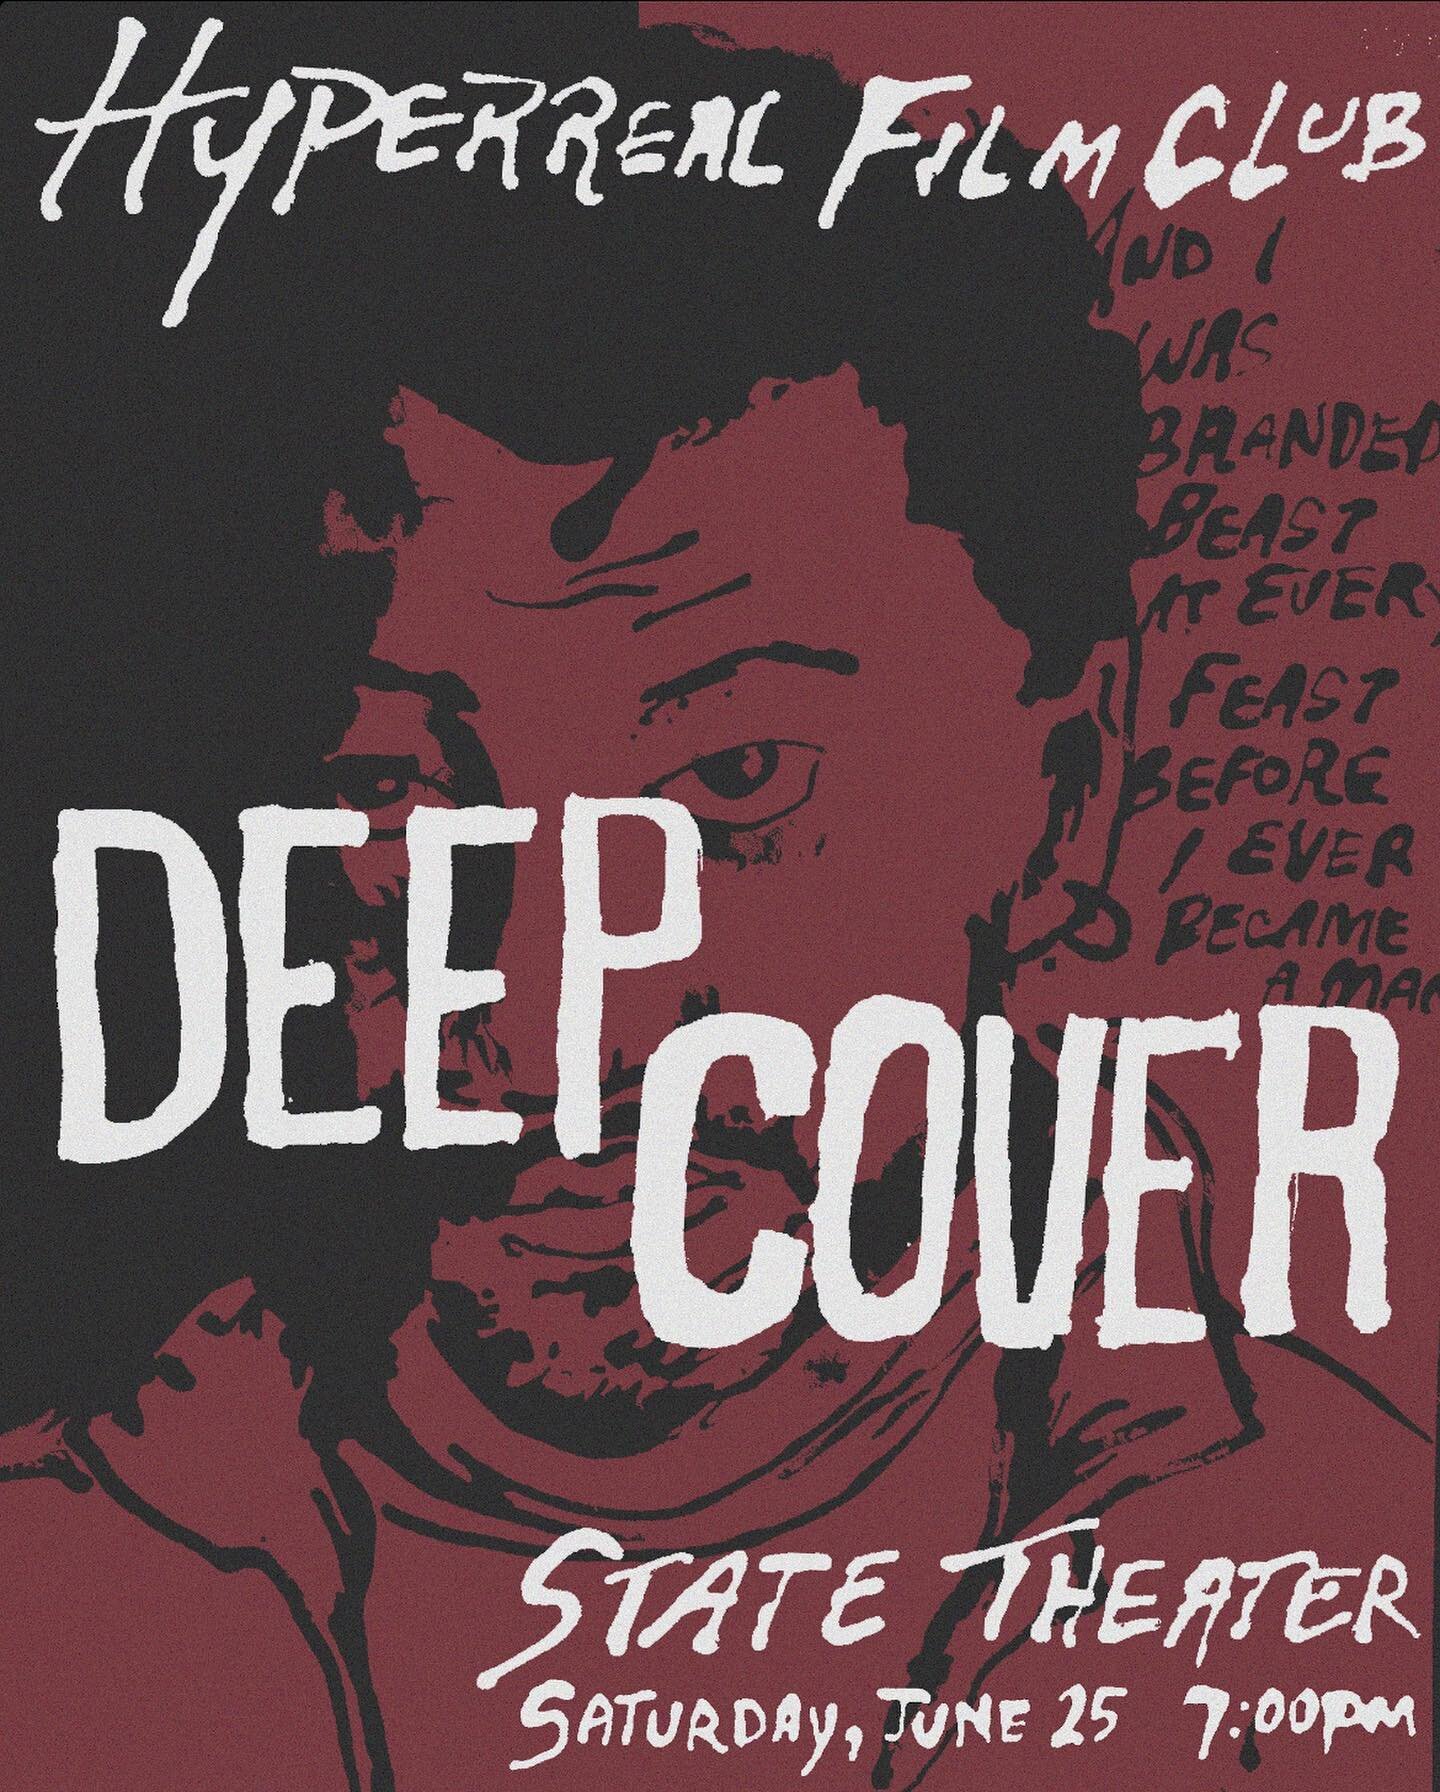 We made some new friends and we&rsquo;re spending next Saturday evening with them! @hyperrealfilmclub is pairing Tejano Night ahead of a screening of Deep Cover at the State Theater which is right next door to the @paramountaustin in Austin! 

Writer